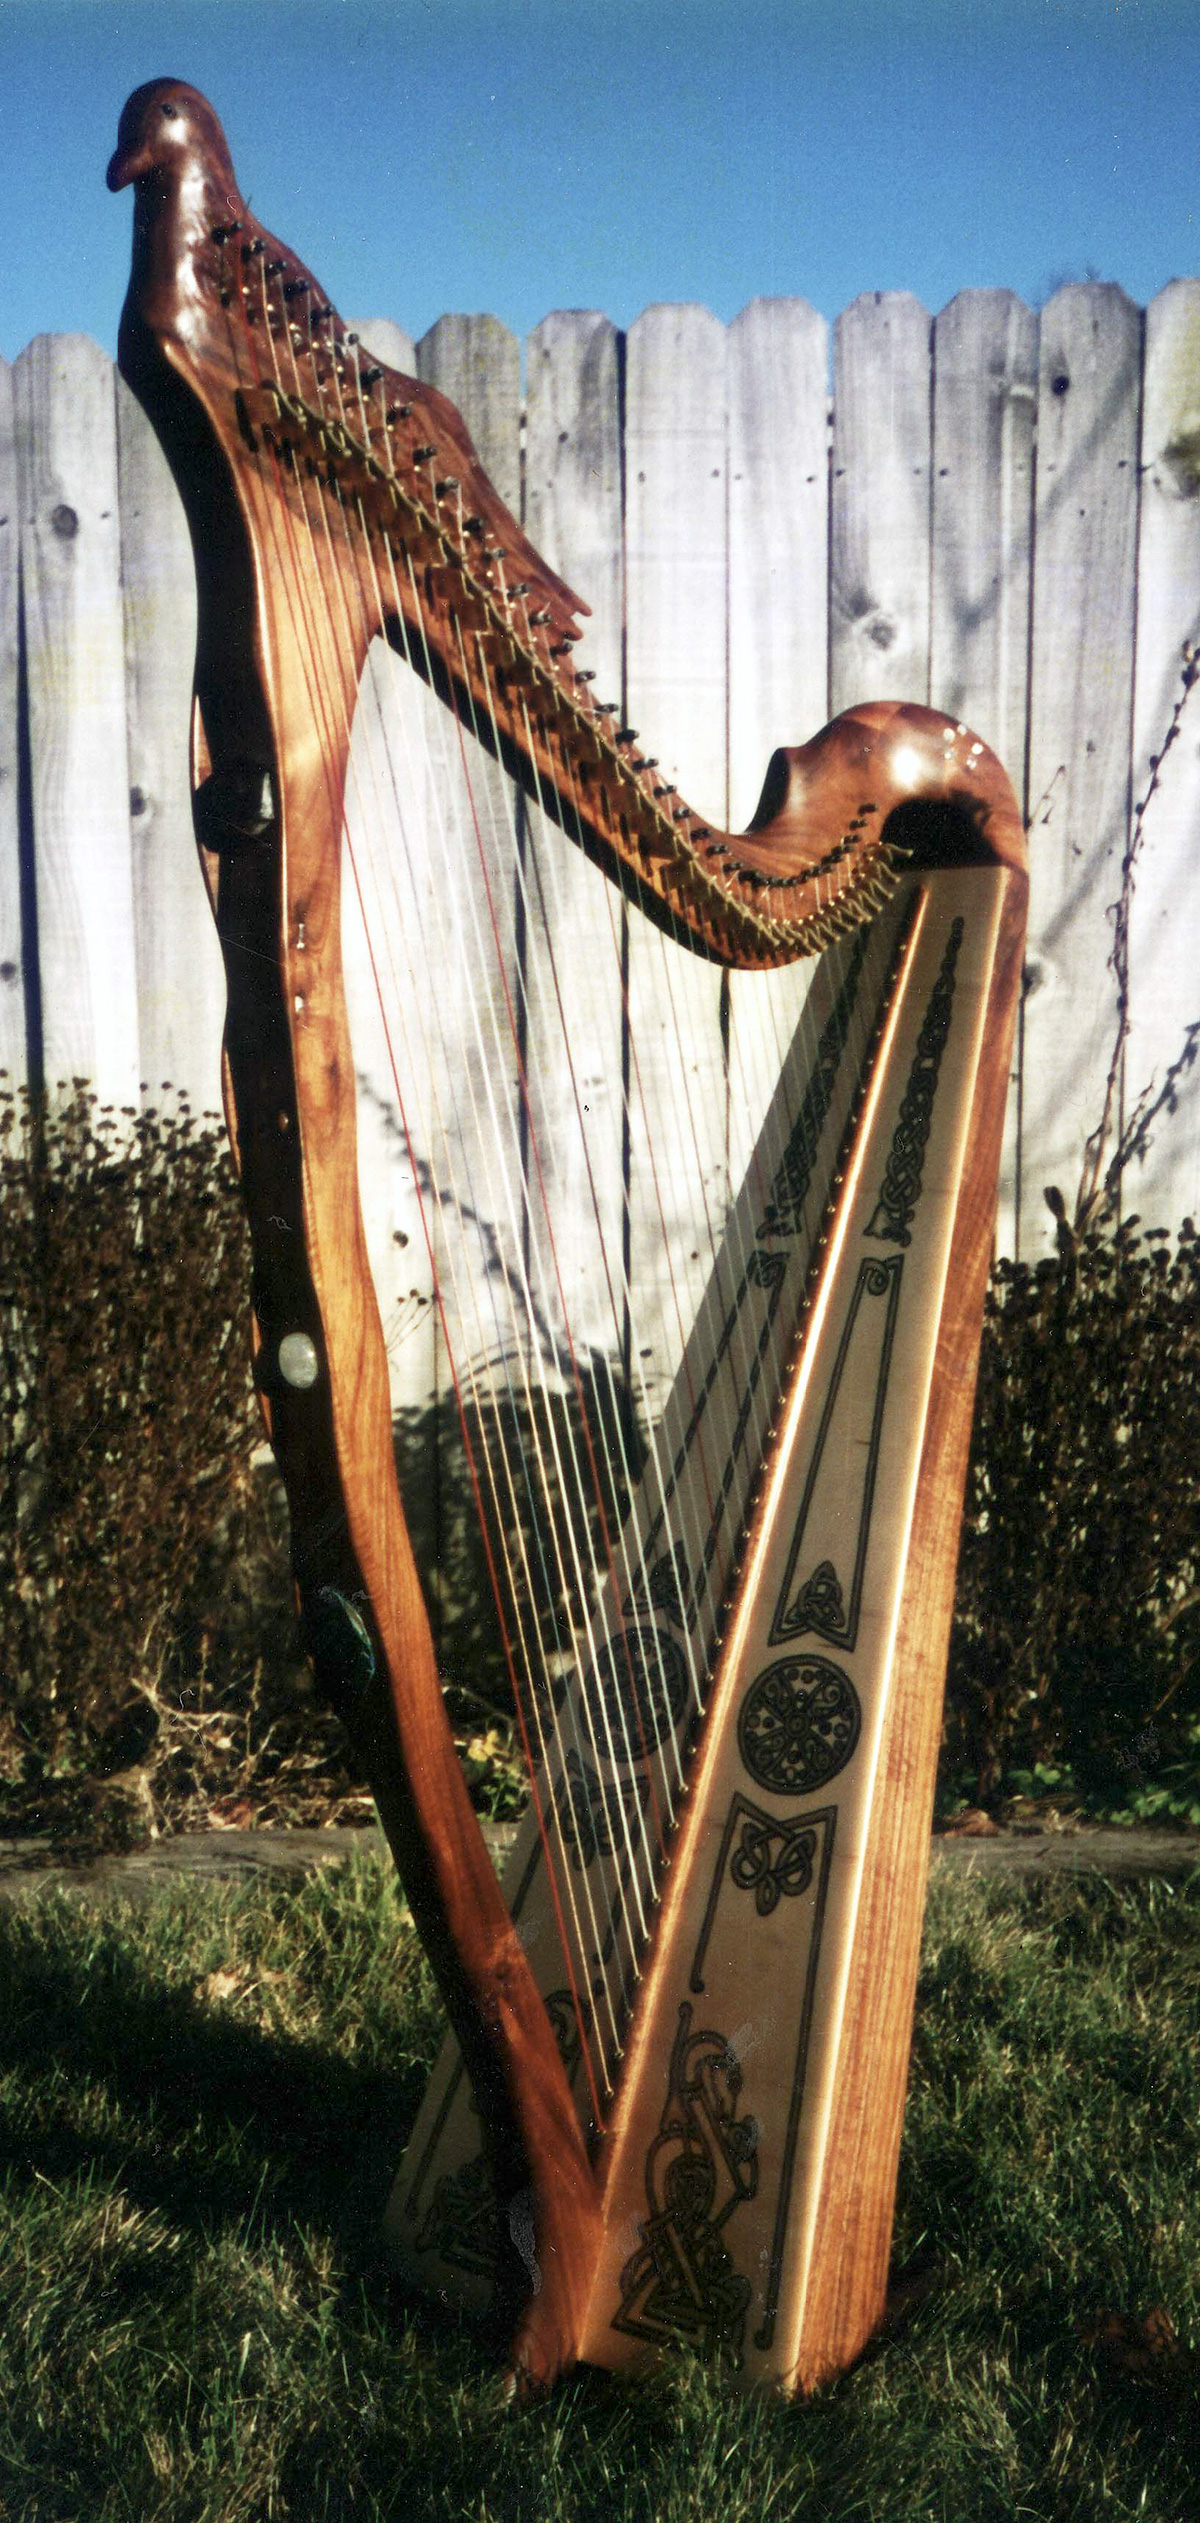 Click to learn more about caring for your harp.